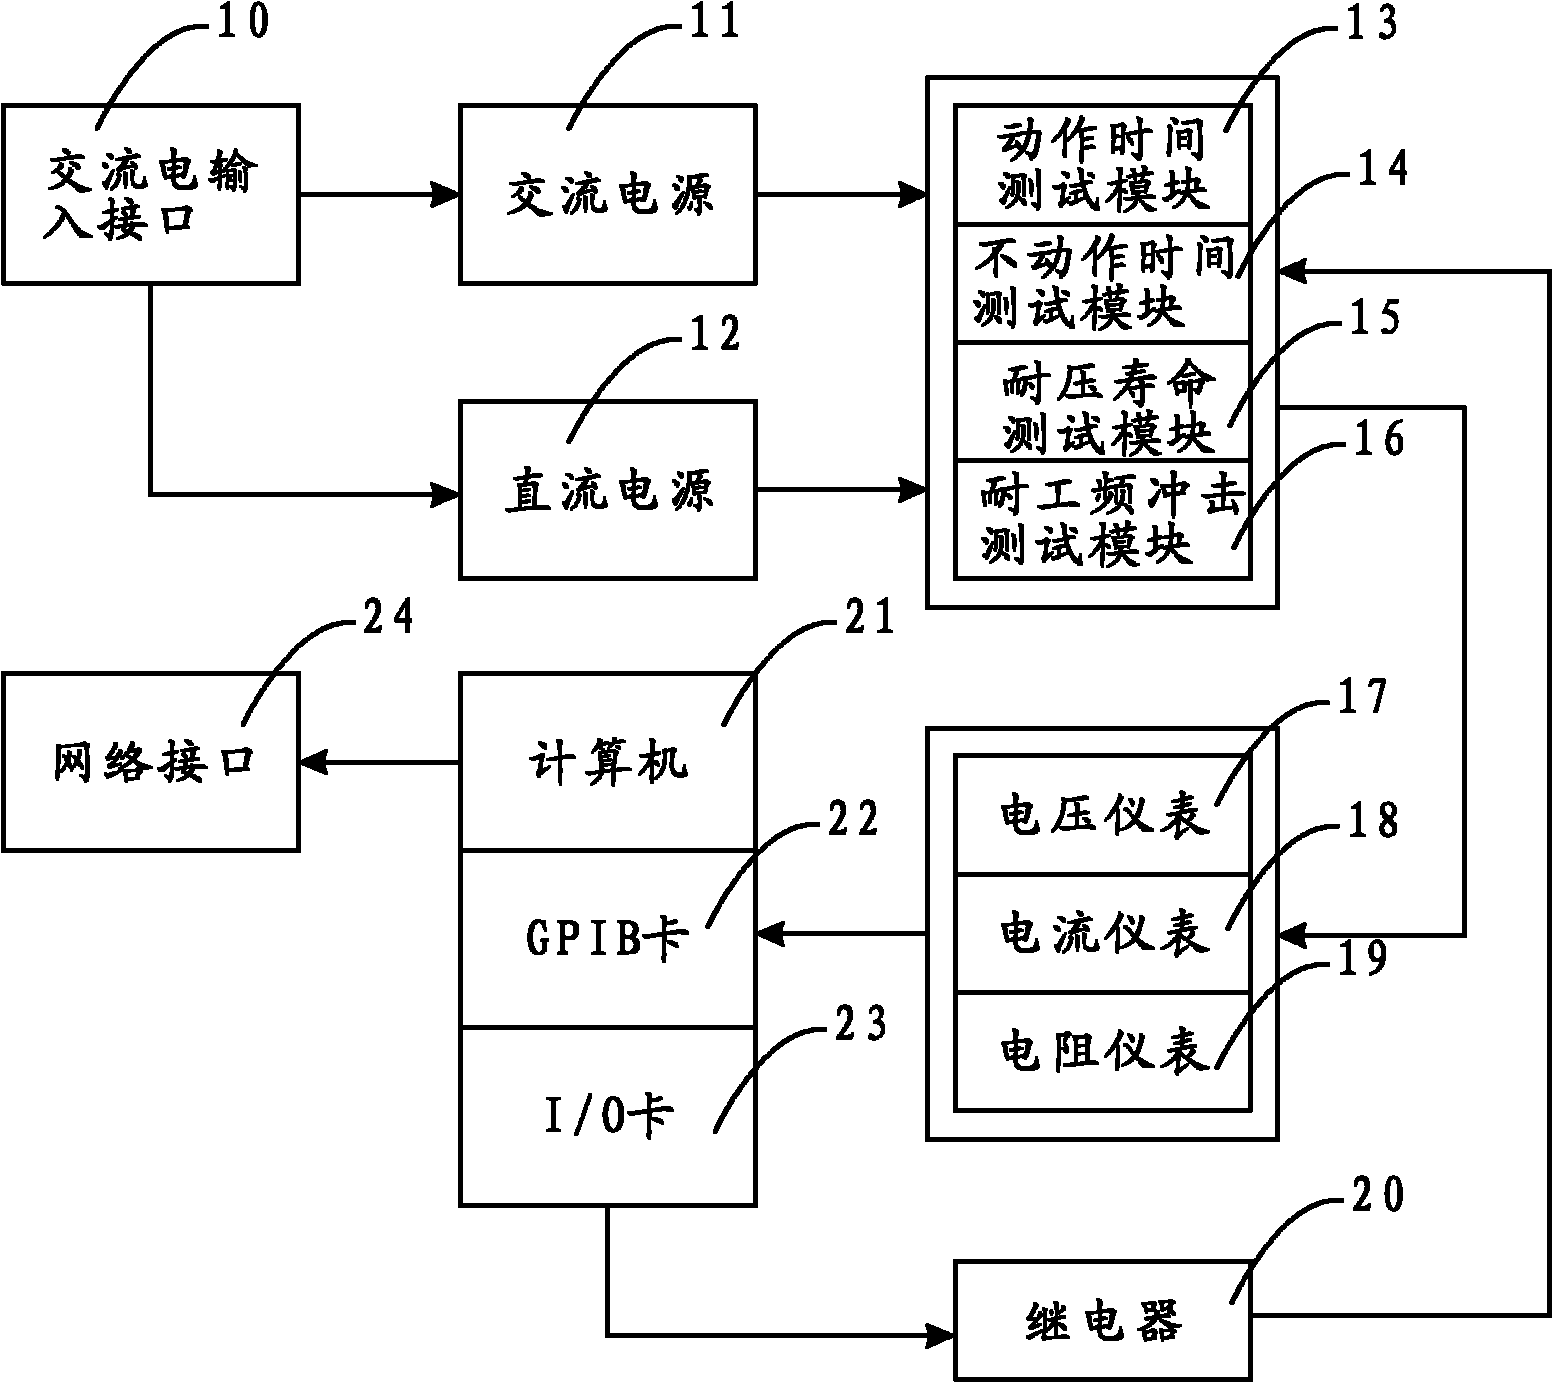 Integrated test system for PTC (Positive Temperature Coefficient) resettable fuse